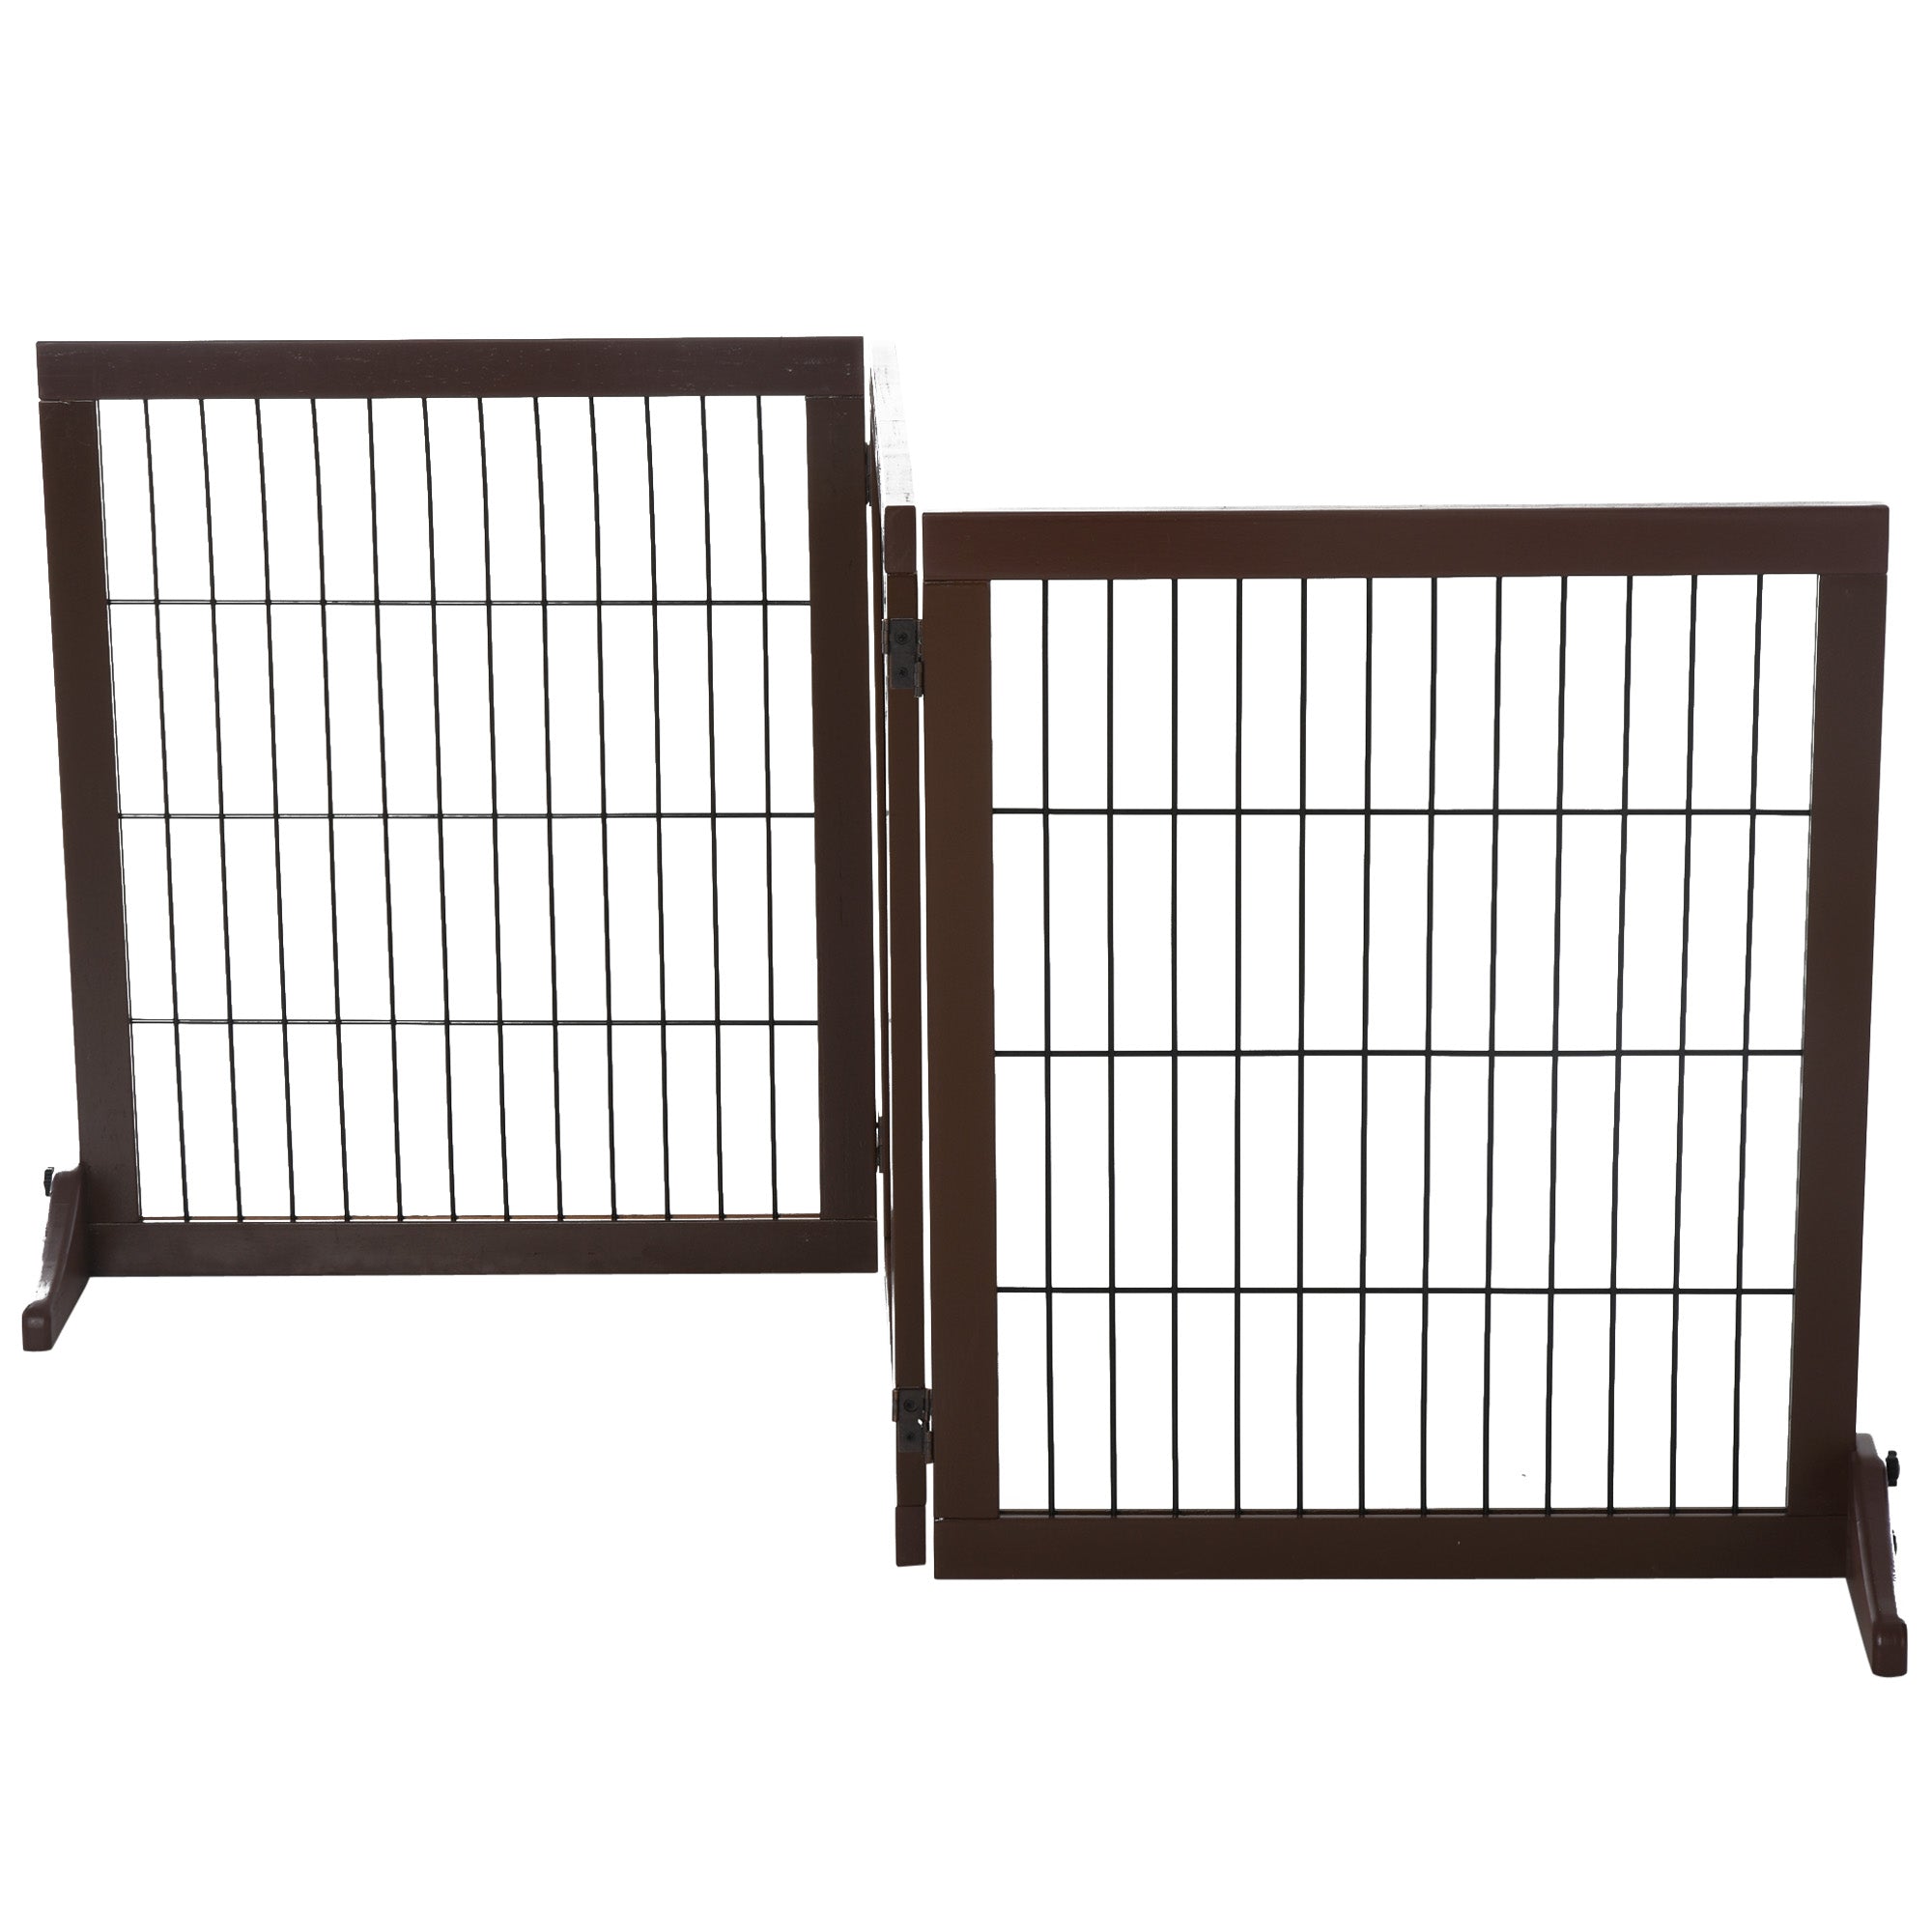 3 Panel Pet Gate Pine Frame Indoor Foldable Dog Barrier w/Supporting Foot, Brown